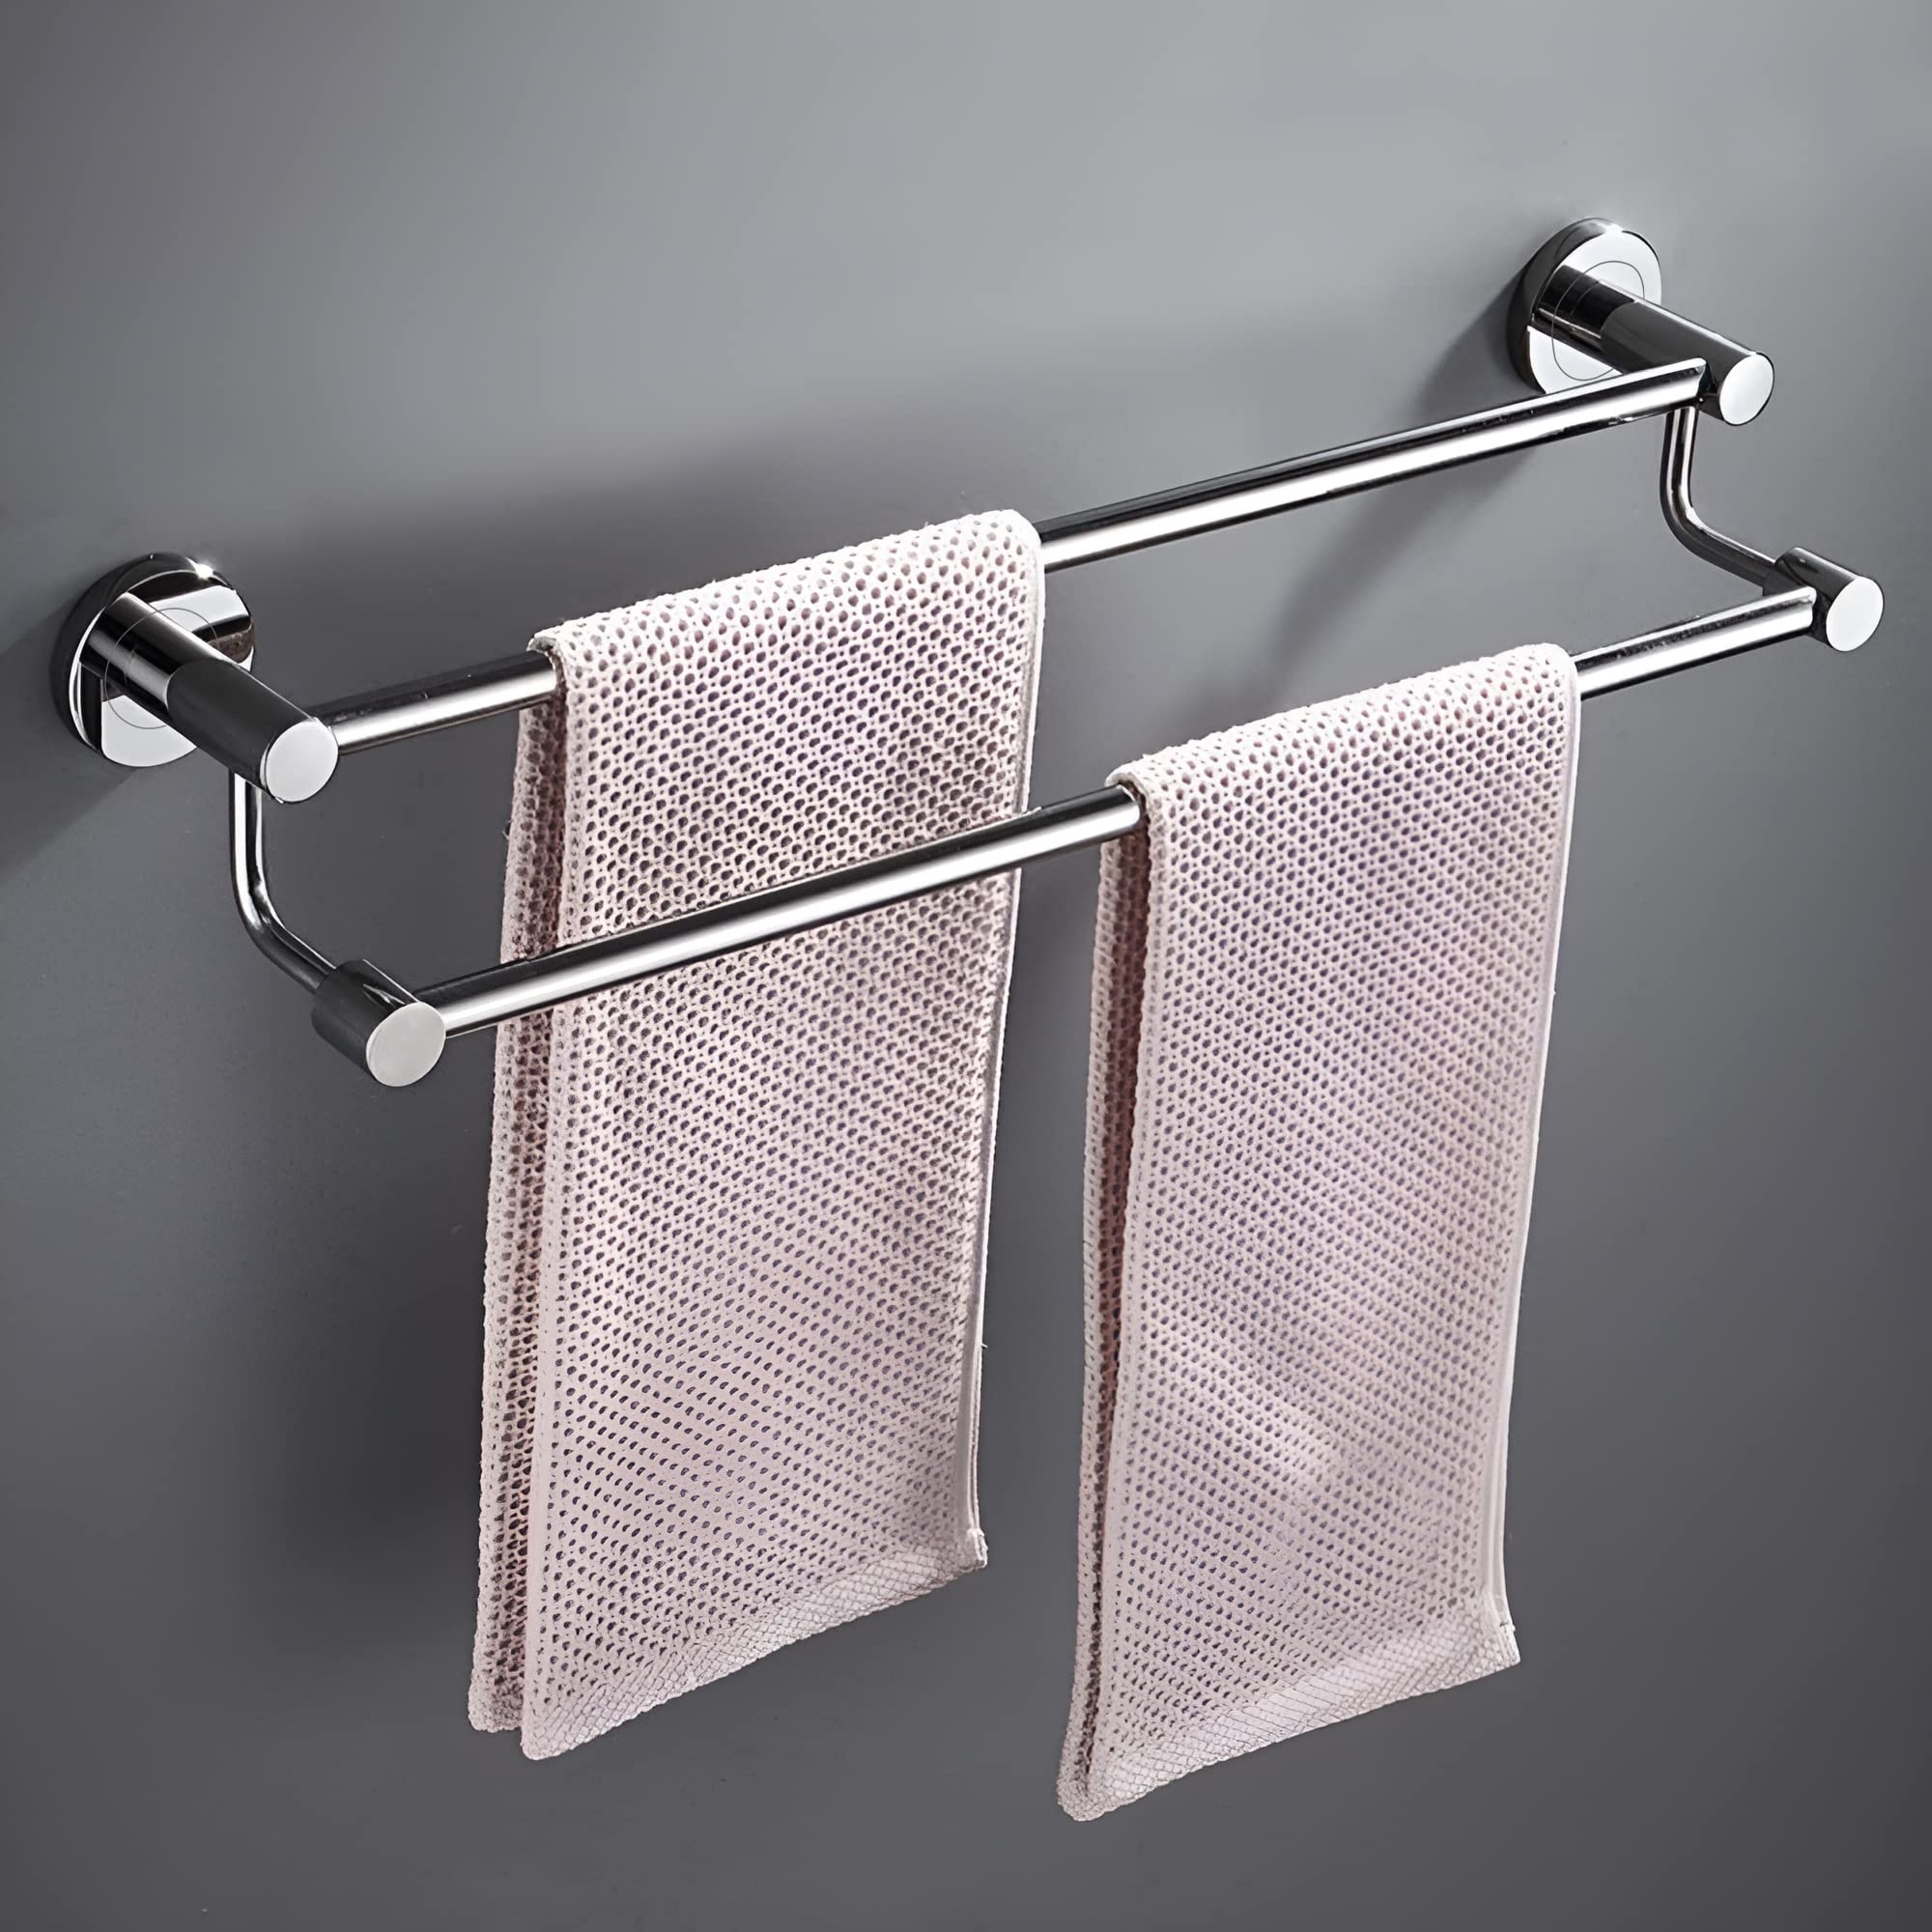 Plantex Stainless Steel Towel Rod/Towel Rack for Bathroom/Towel Bar/Hanger/Stand/Bathroom Accessories (24 Inch - Chrome Finish) - Pack of 3